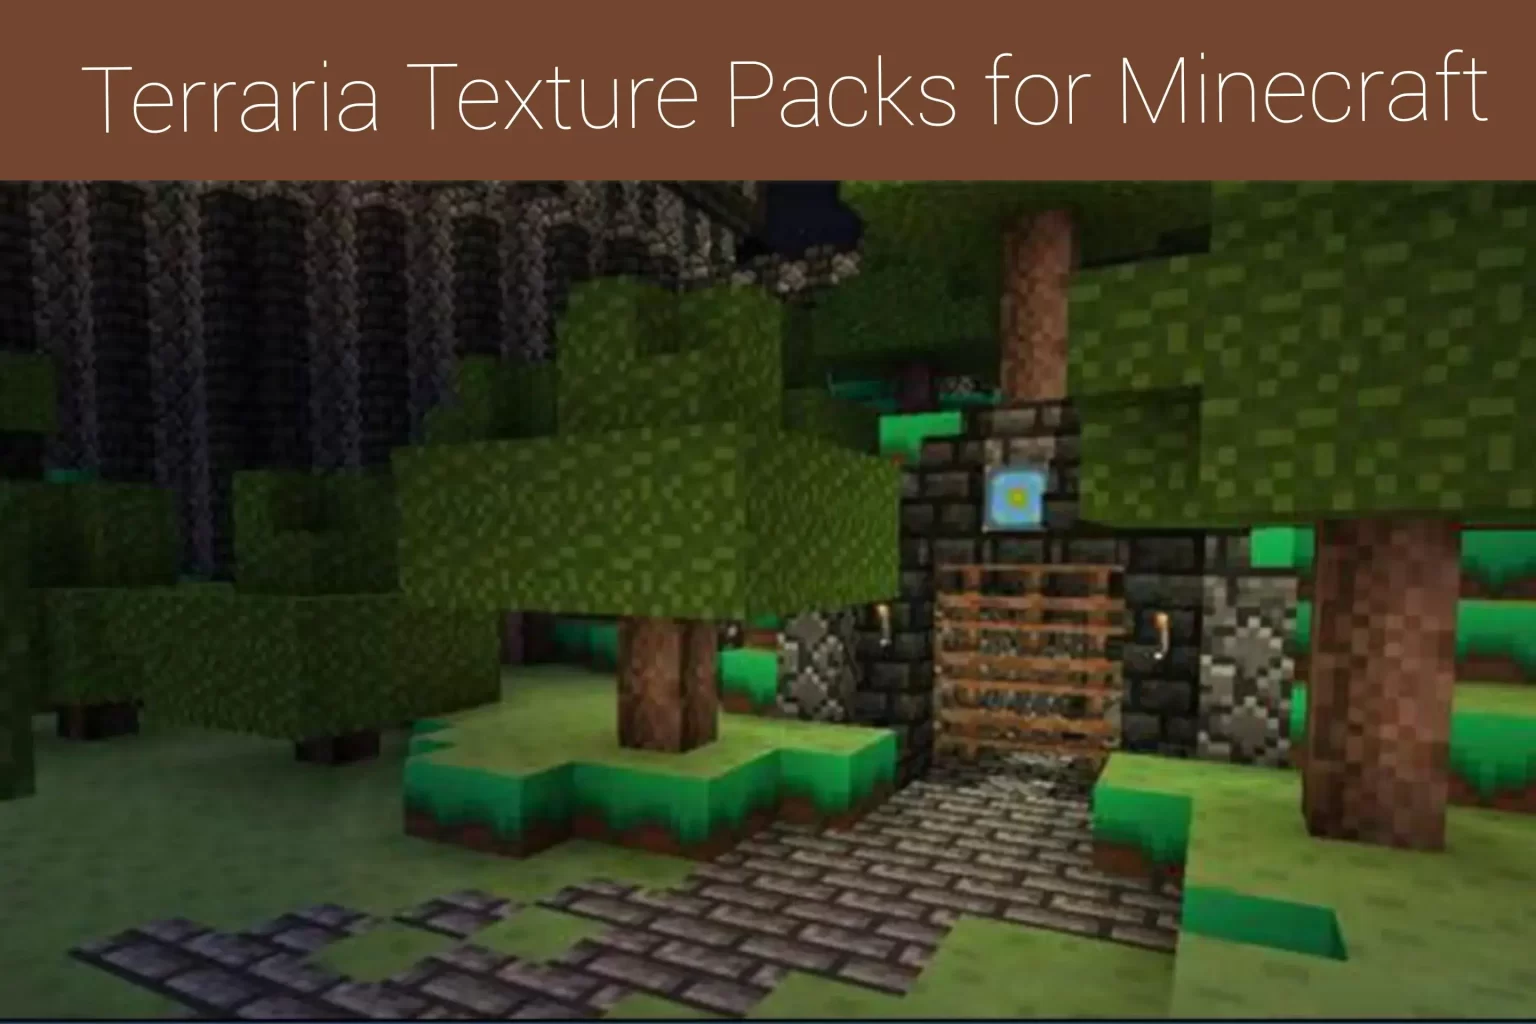 Terraria Texture Packs for Minecraft
